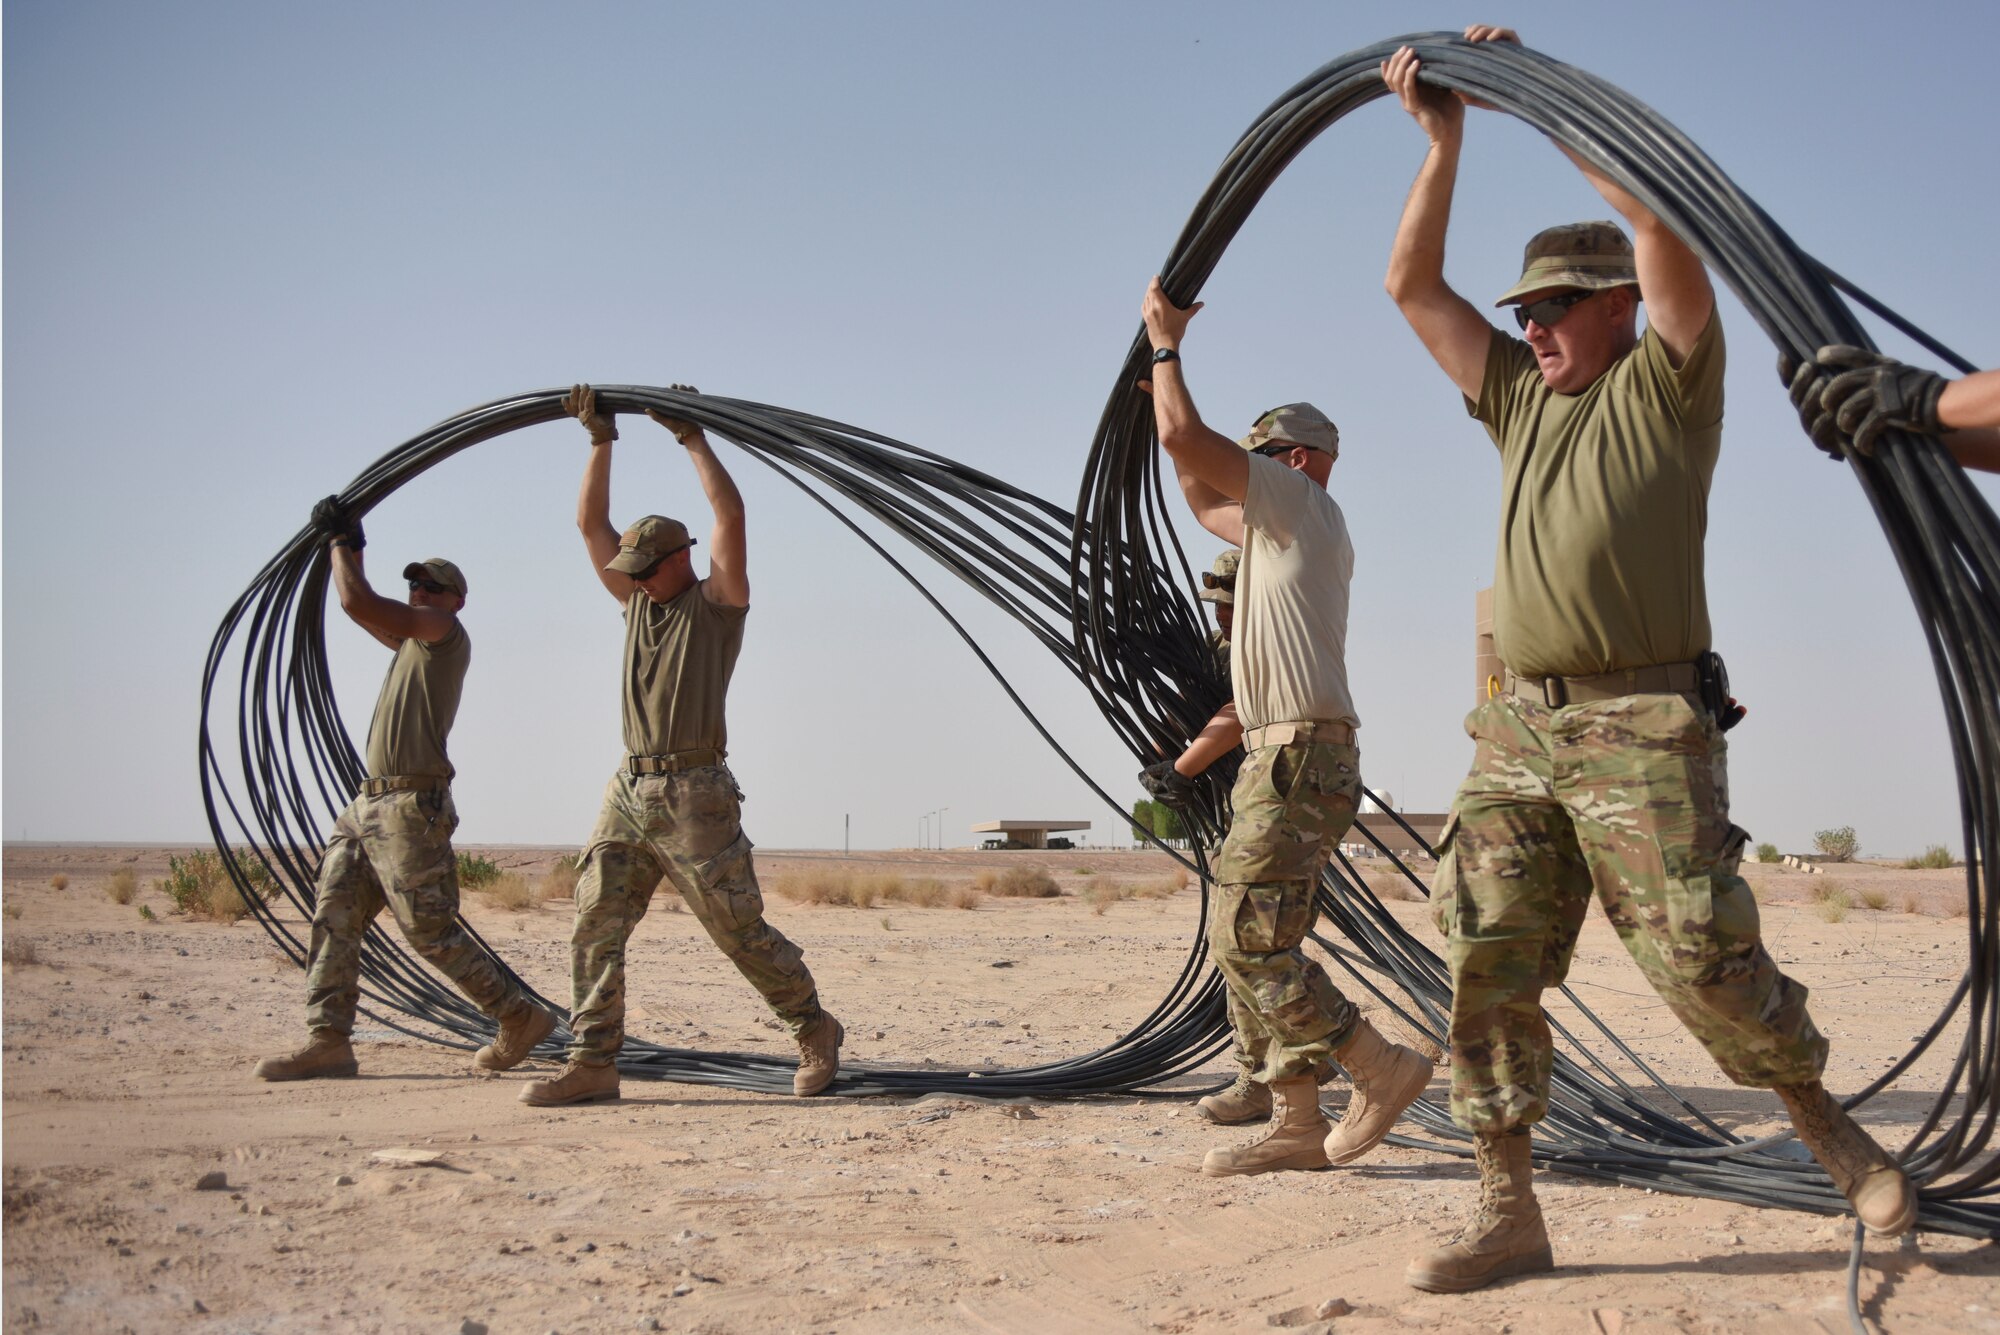 Airmen with the 210th Engineering Installation Squadron move fiber optic cable into place prior to running it to the next access point at Prince Sultan Air Base, Saudi Arabia on Nov. 5, 2019.